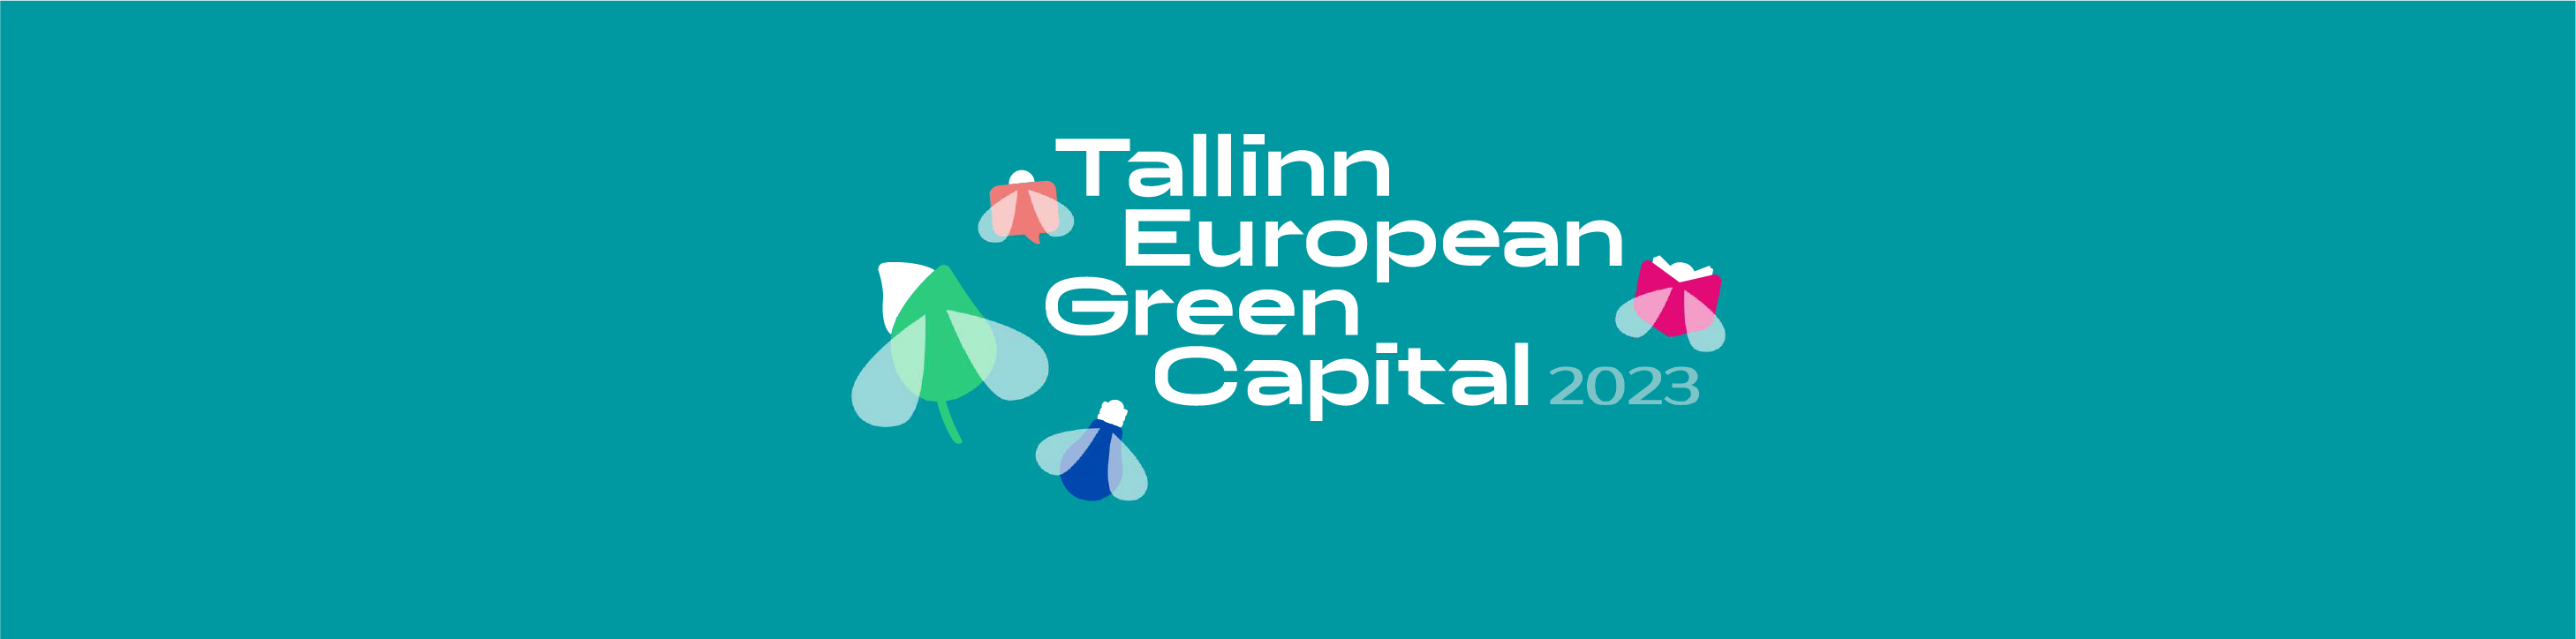 Robotex is  supported by  European Green Capital Tallinn 2023!